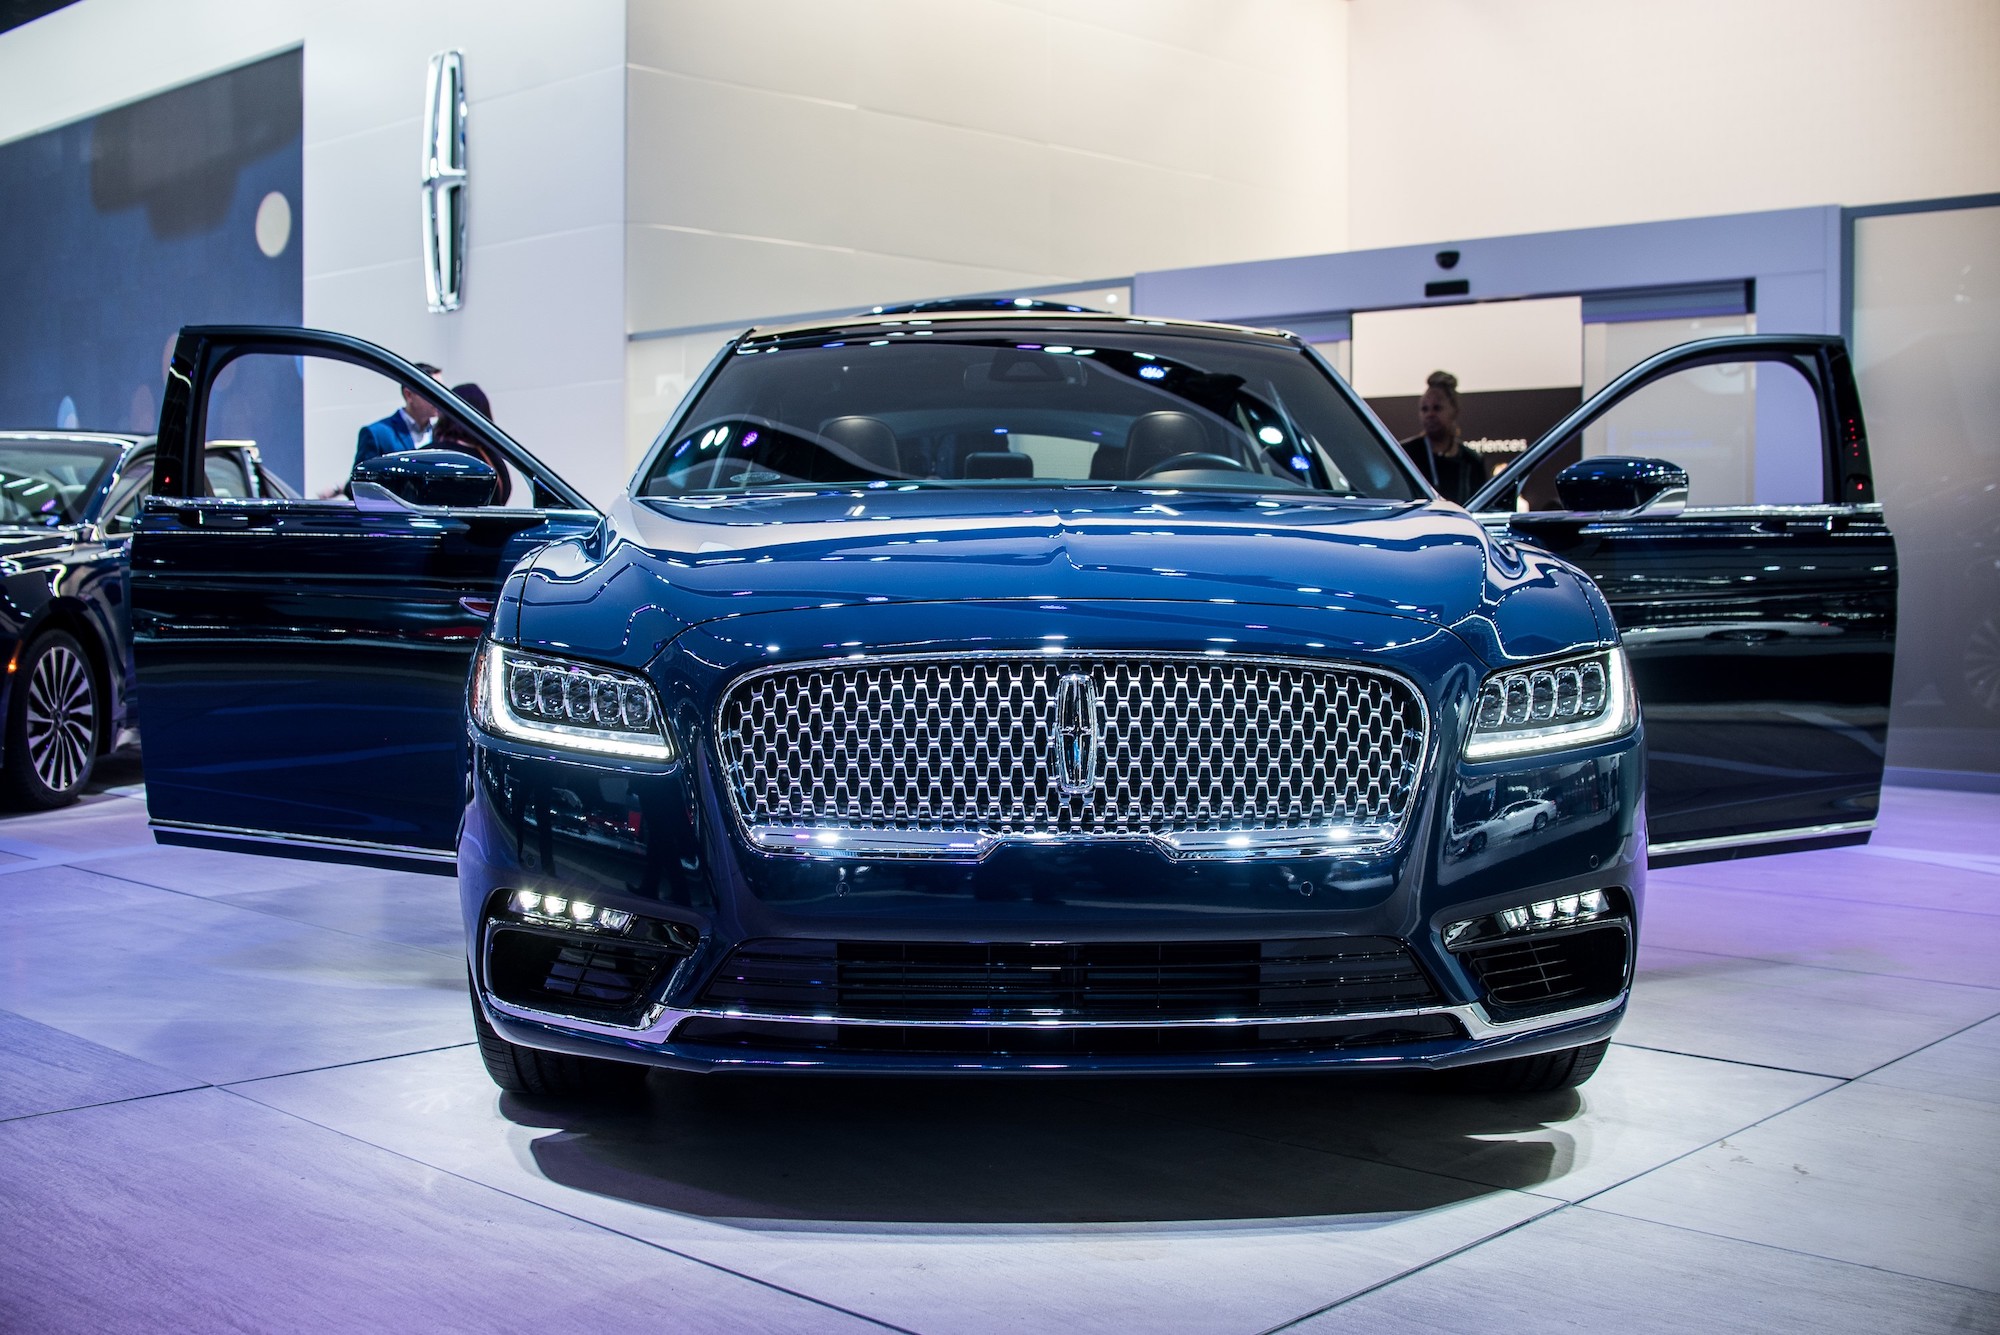 The 2020 Lincoln MKZ Is One Of the Best Luxury Cars For Under $40,000